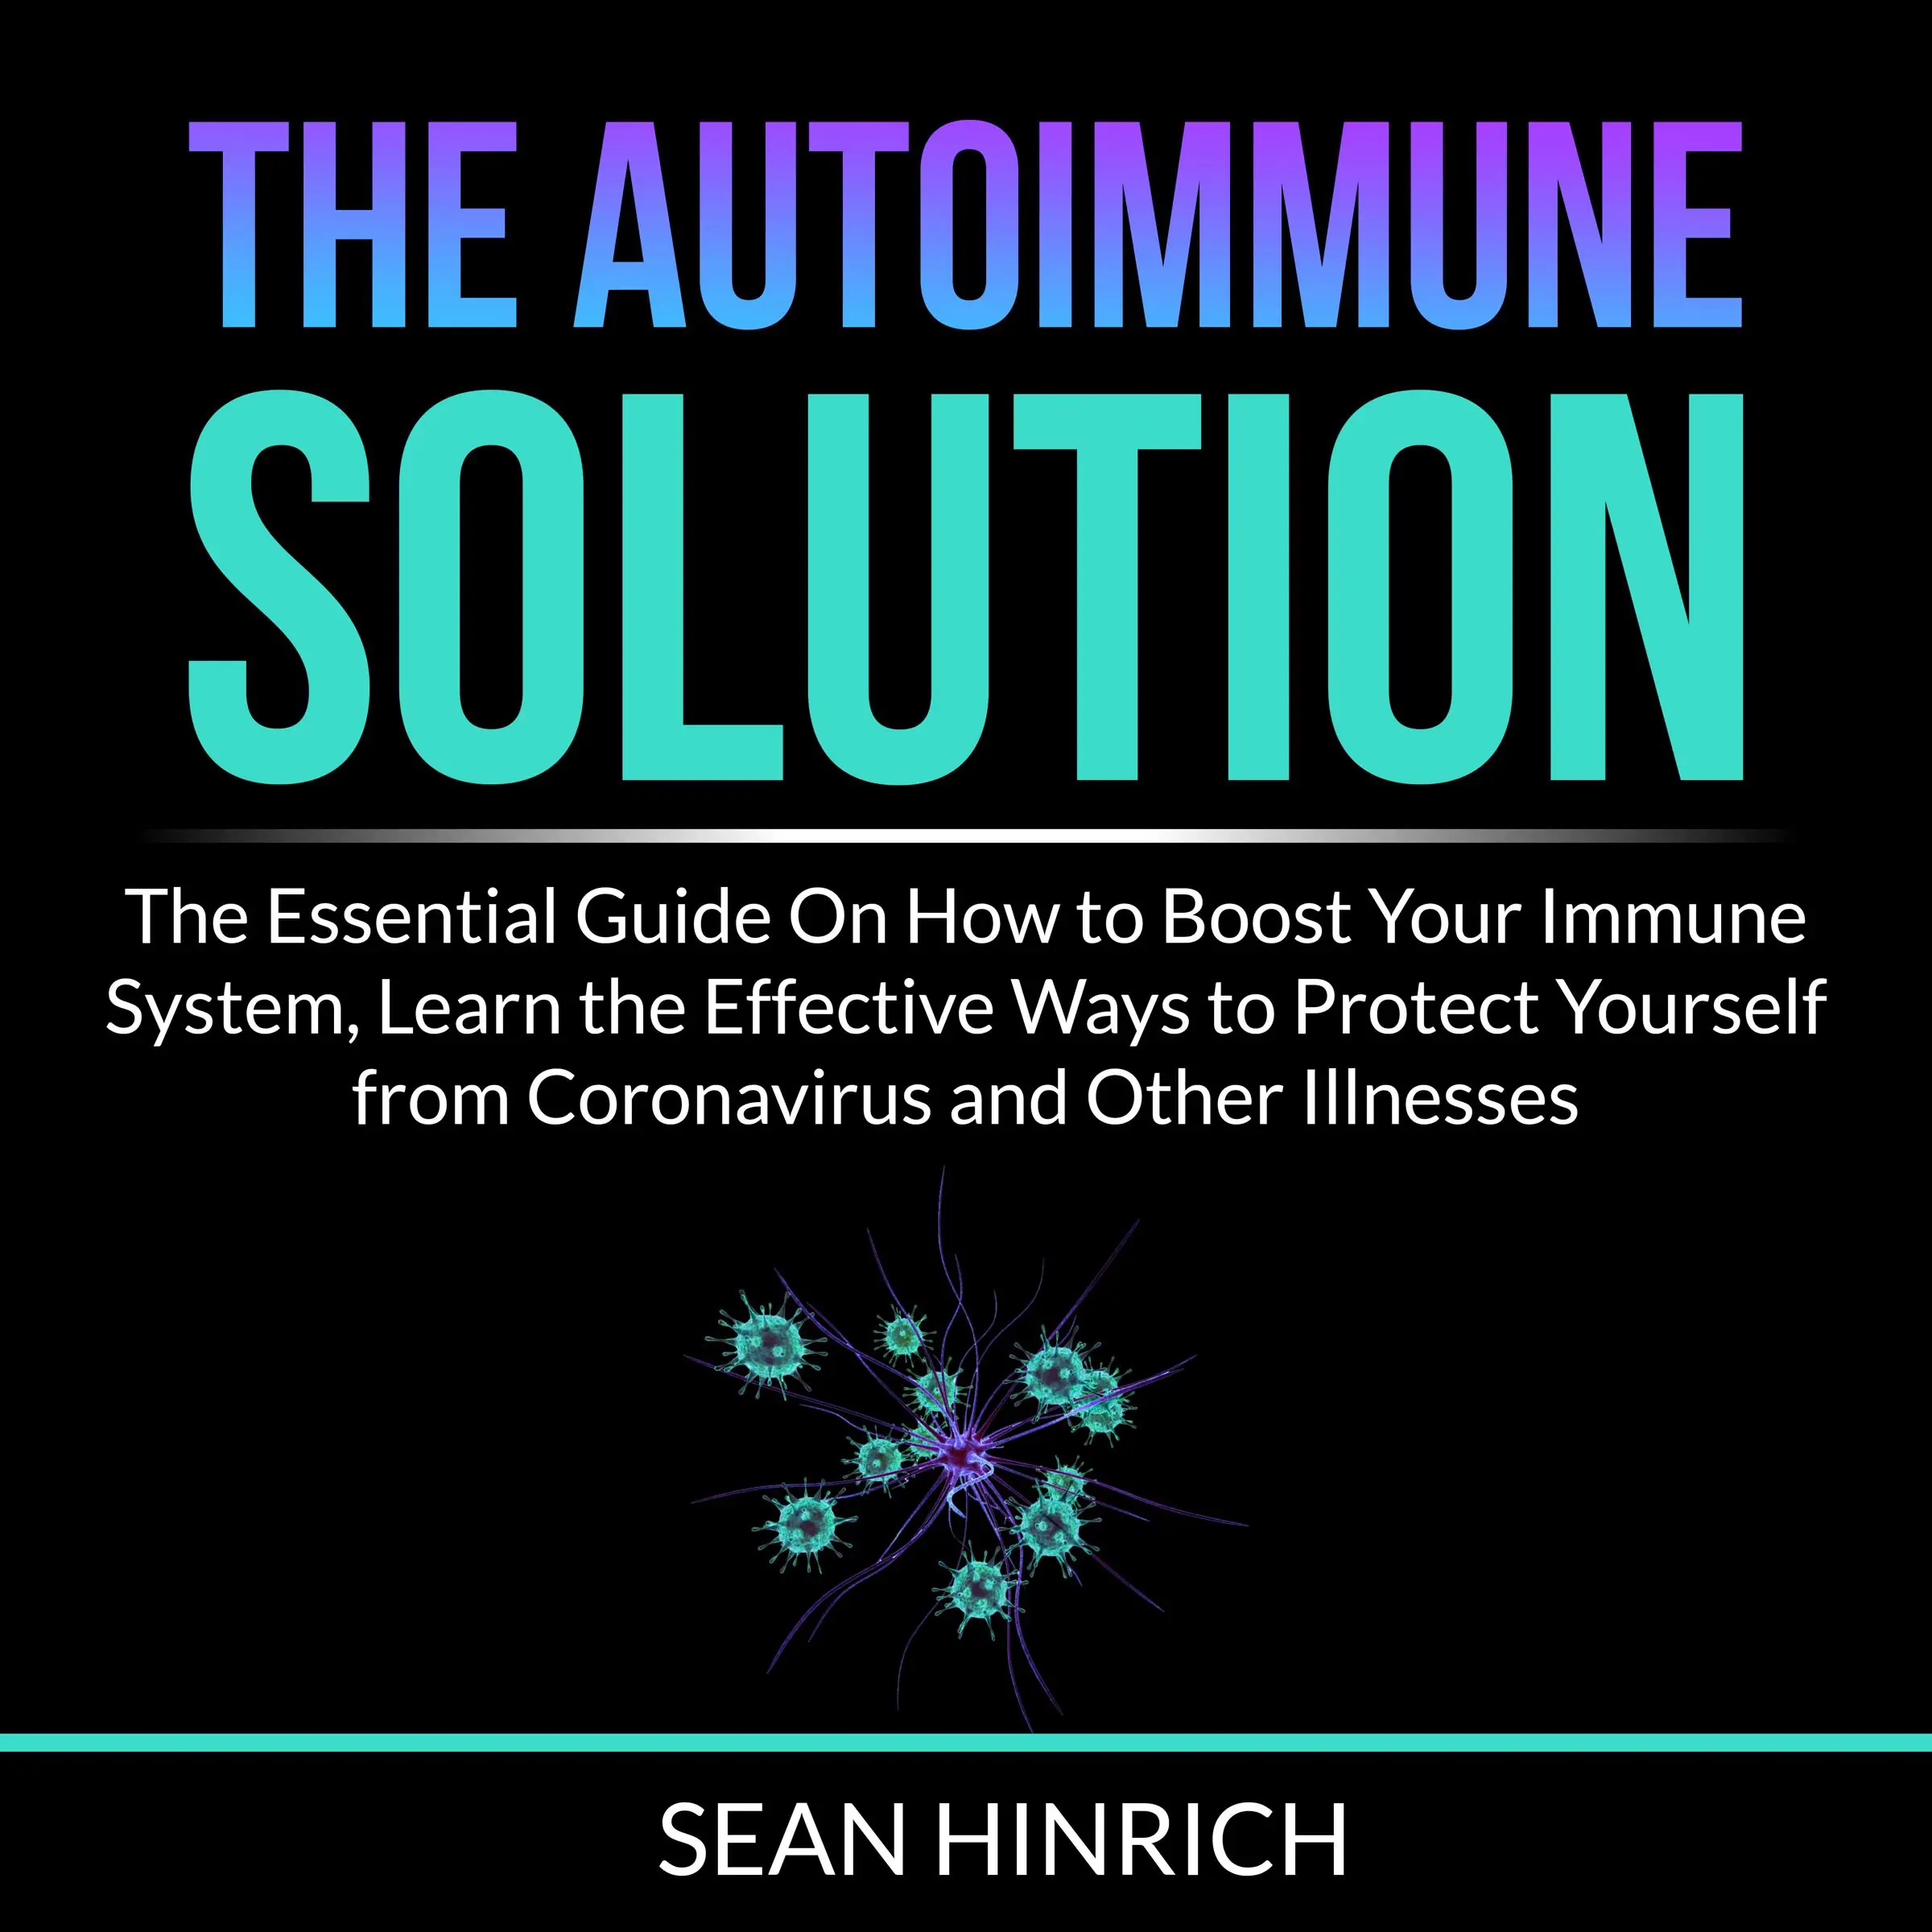 The Autoimmune Solution: The Essential Guide On How to Boost Your Immune System, Learn the Effective Ways to Protect Yourself from Coronavirus and Other Illnesses Audiobook by Sean Hinrich